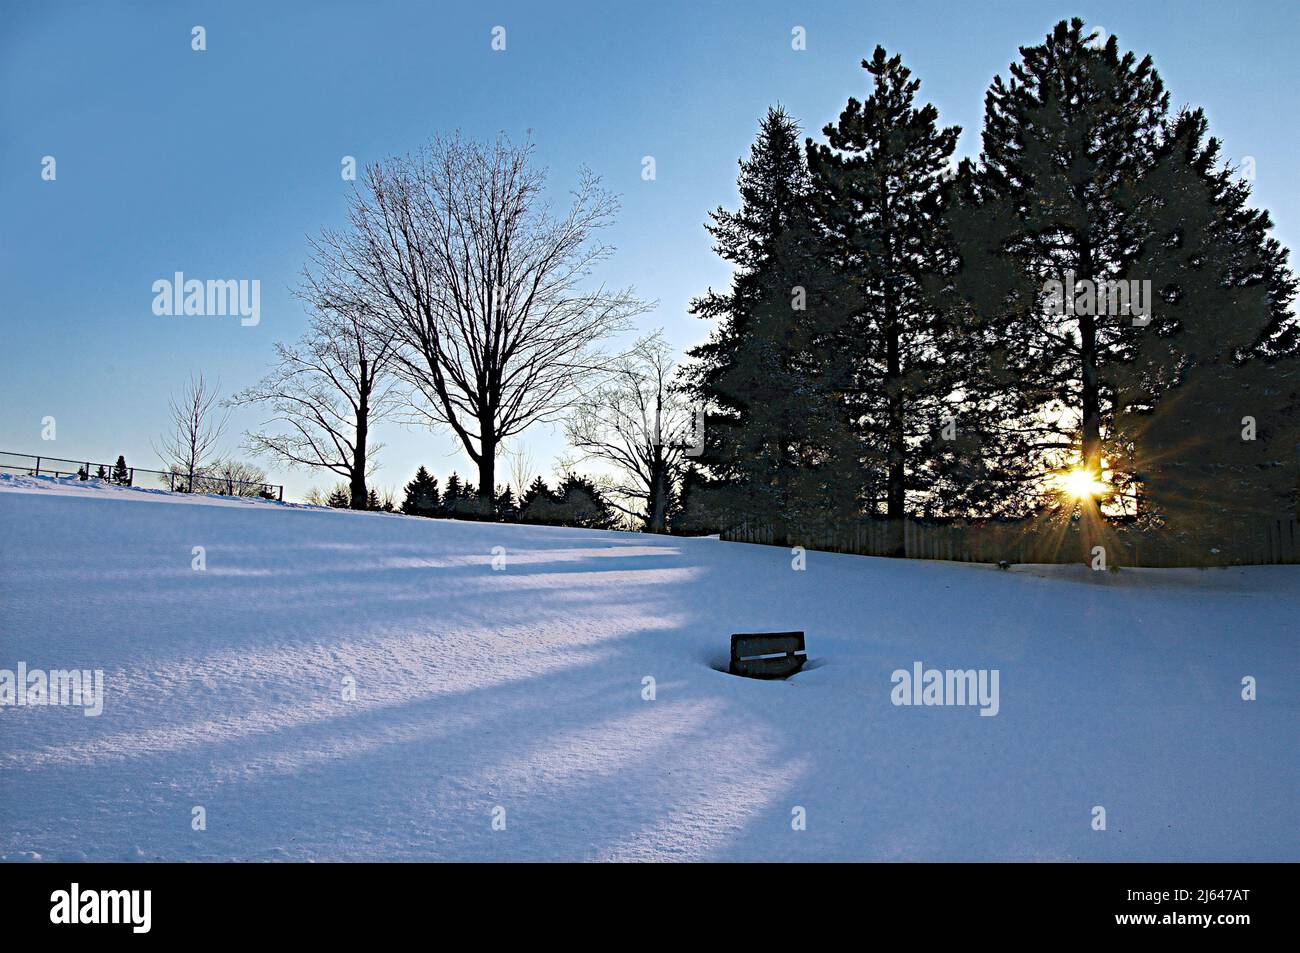 Sunset on a public park with deep snow covering the park bench Stock Photo